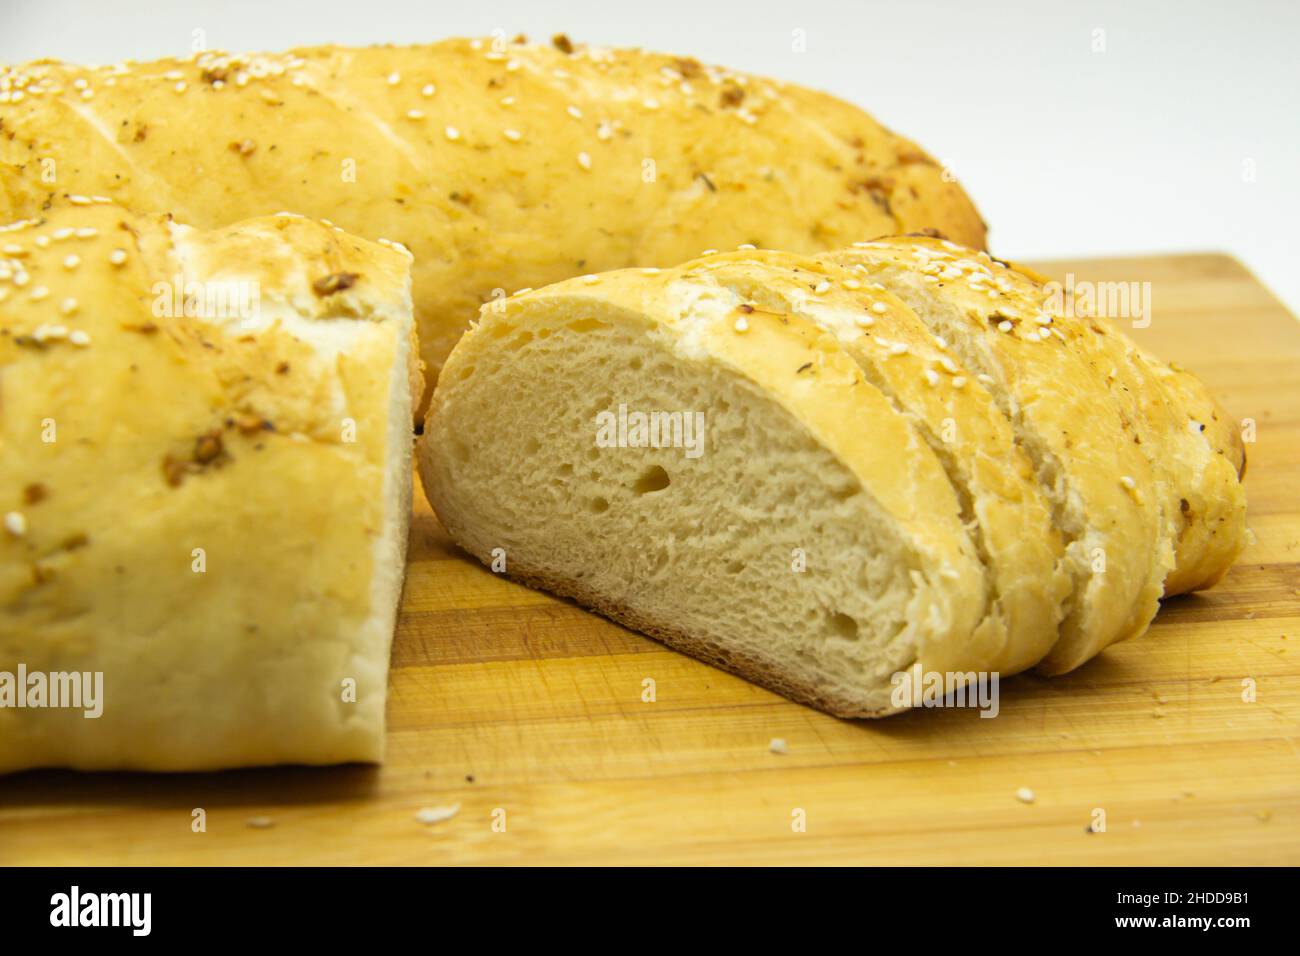 Wheat bread baked from flour at home. Sliced bread on wooden board  against background. Food with NO GMO. Homemade bread with spice on it. Stock Photo